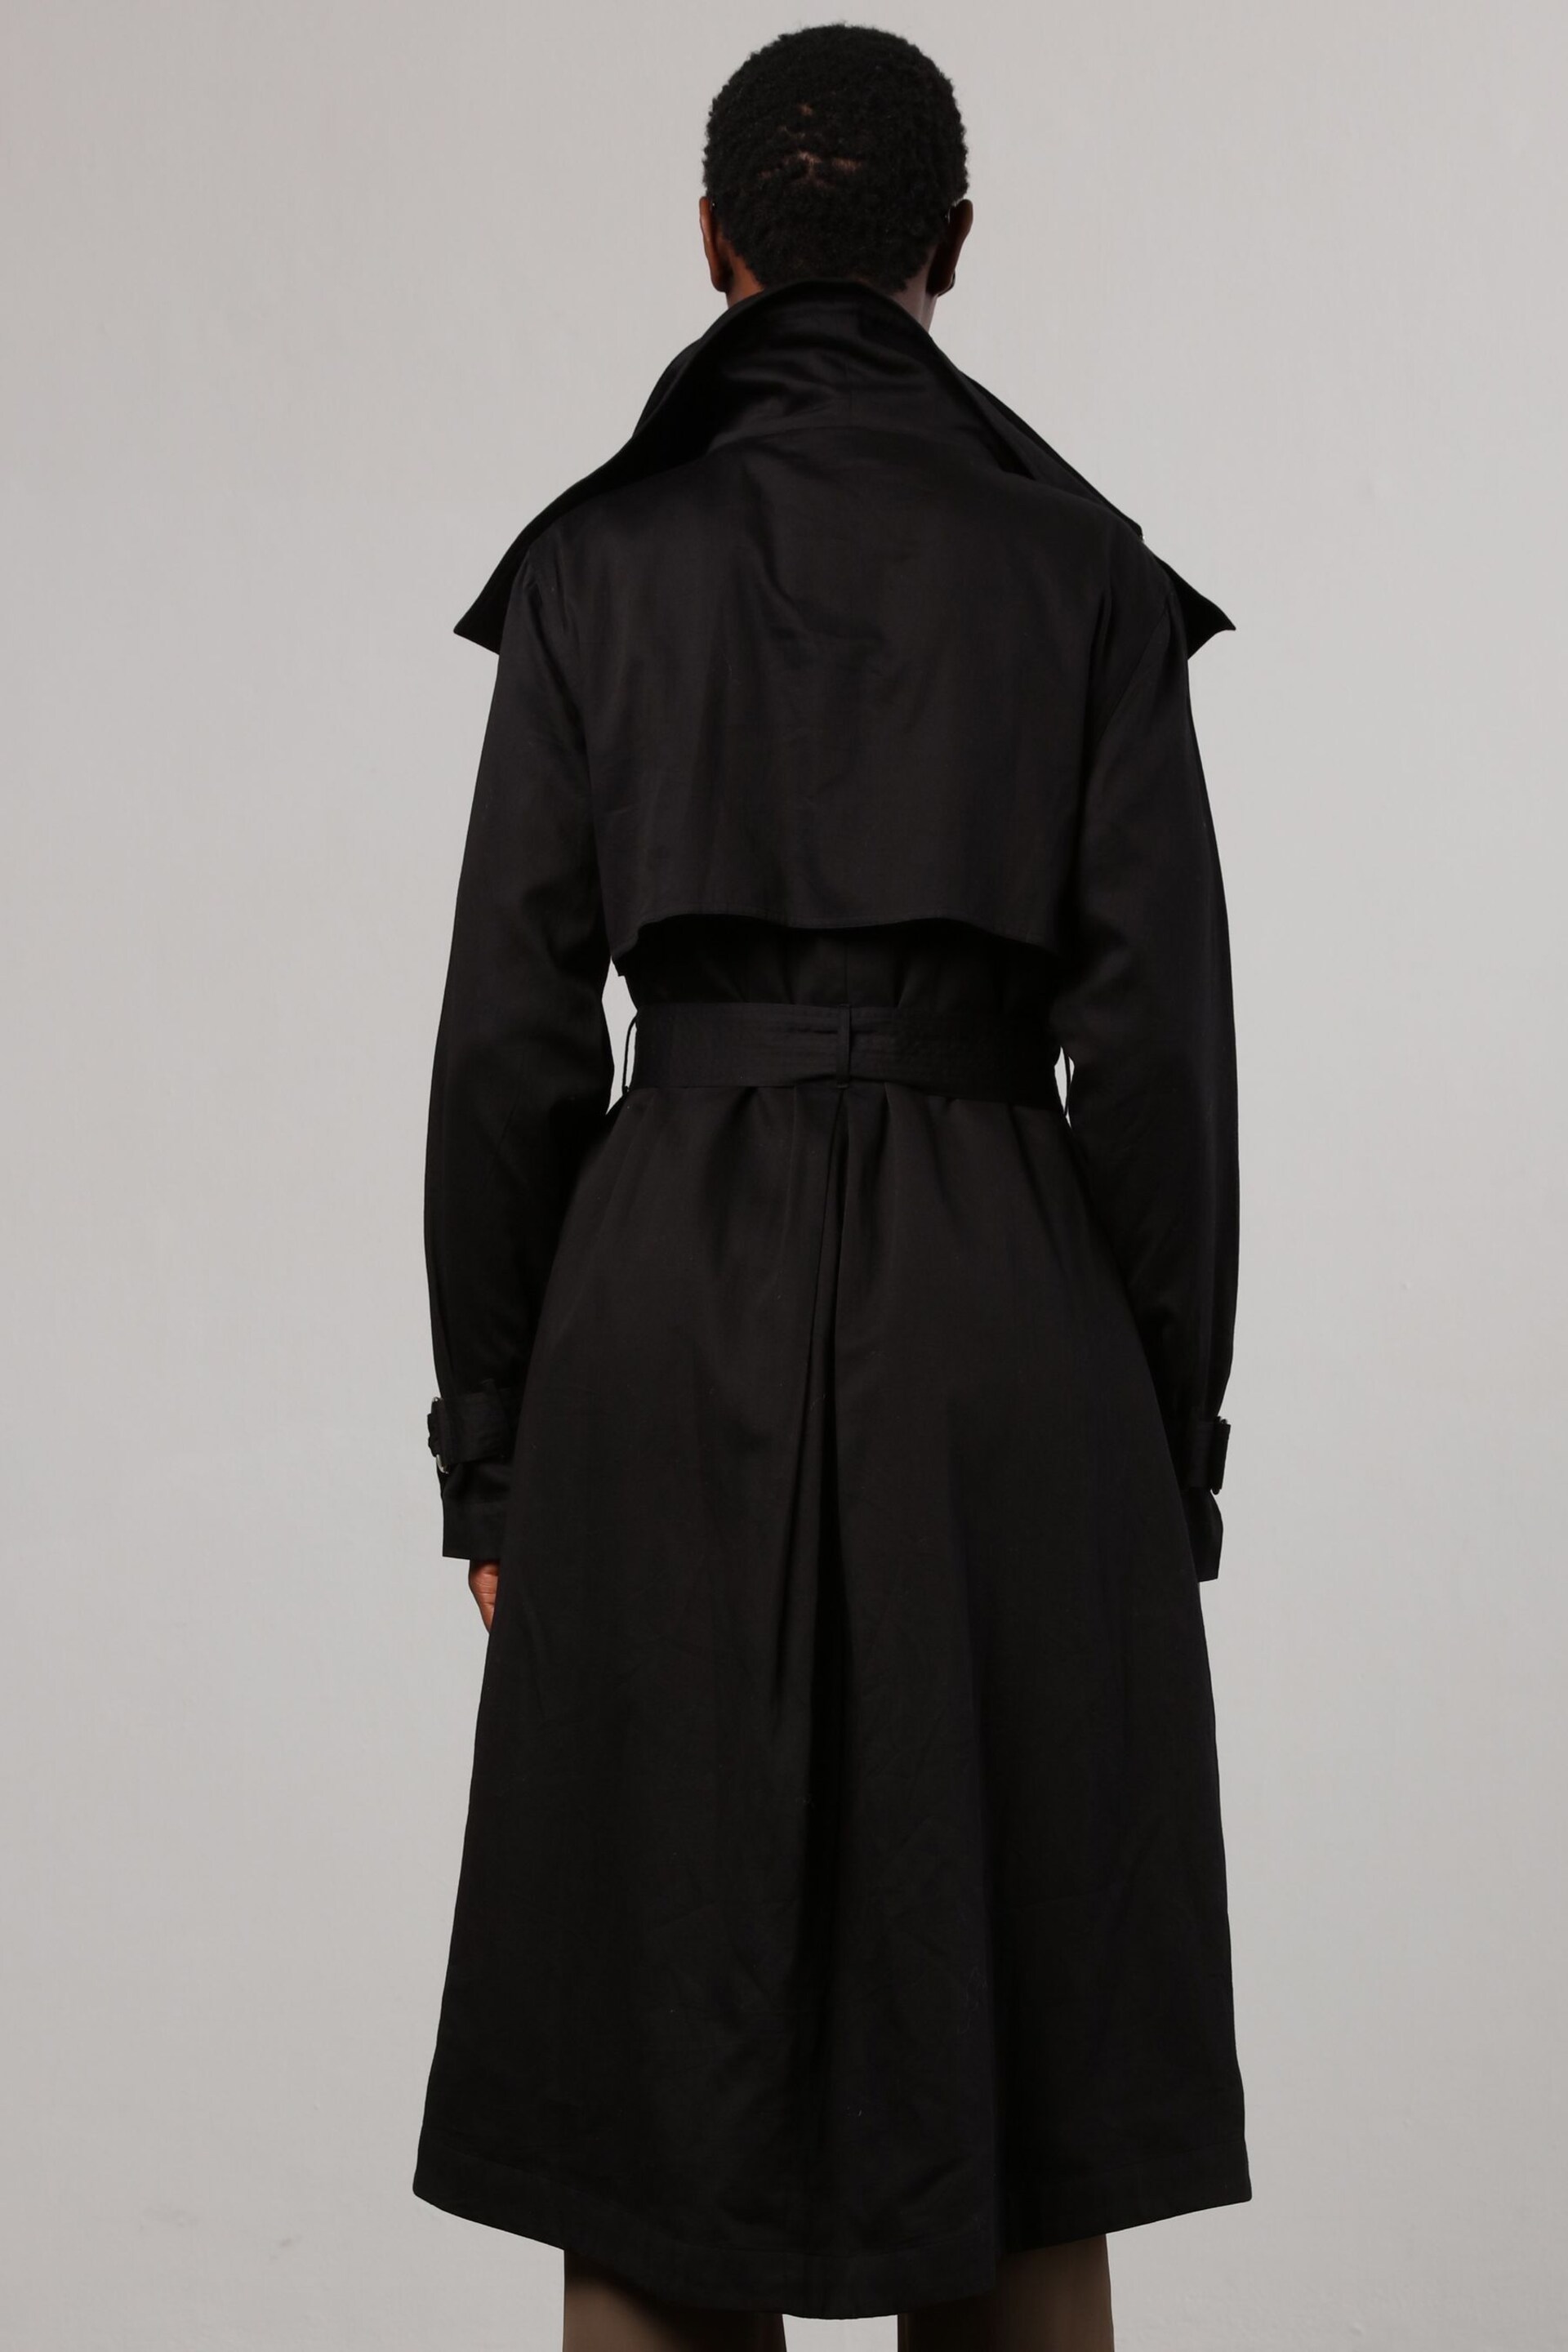 Religion Black Lightweight Waterfall Cotton Charisma Trench Coat - Image 4 of 9